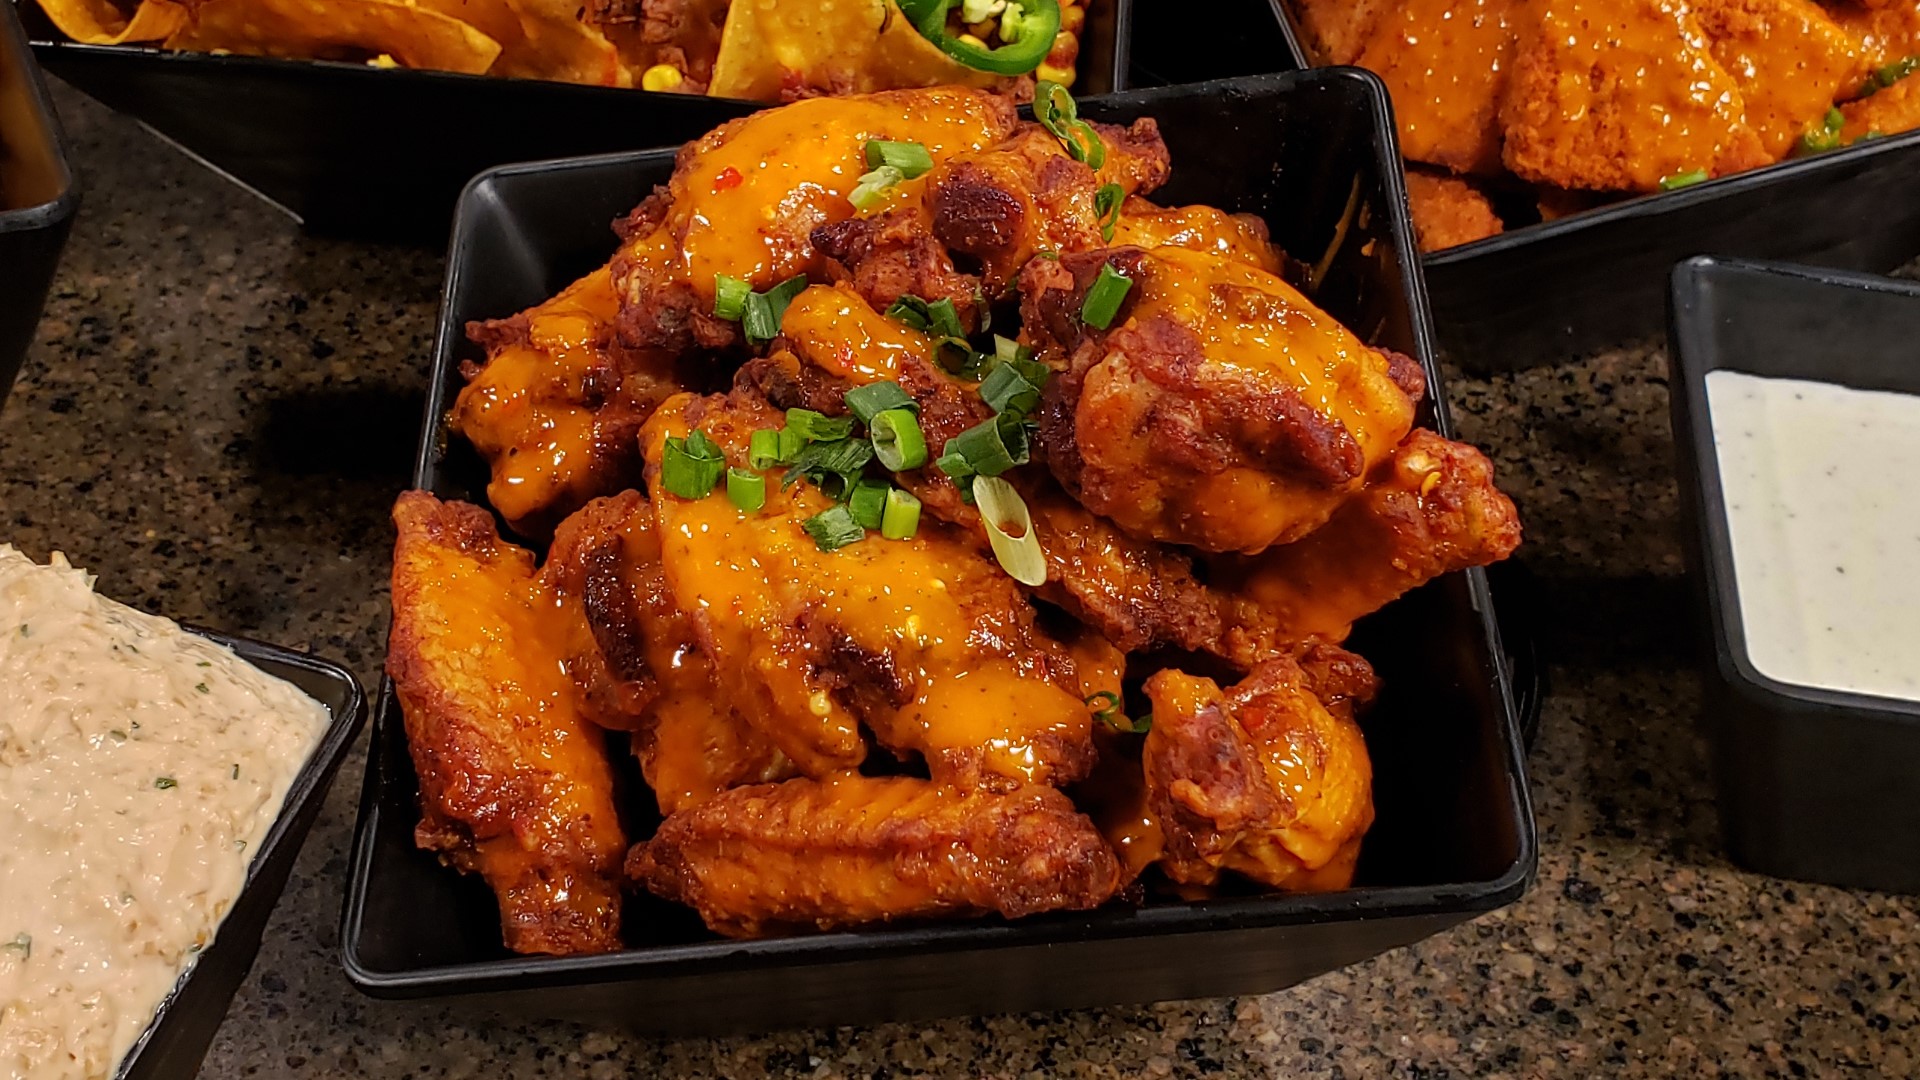 Jan. 30, 2020: Are you looking to make the perfect wings for Super Bowl Sunday? Matt Fish from Melt Bar & Grilled shared his secret sauce recipe.